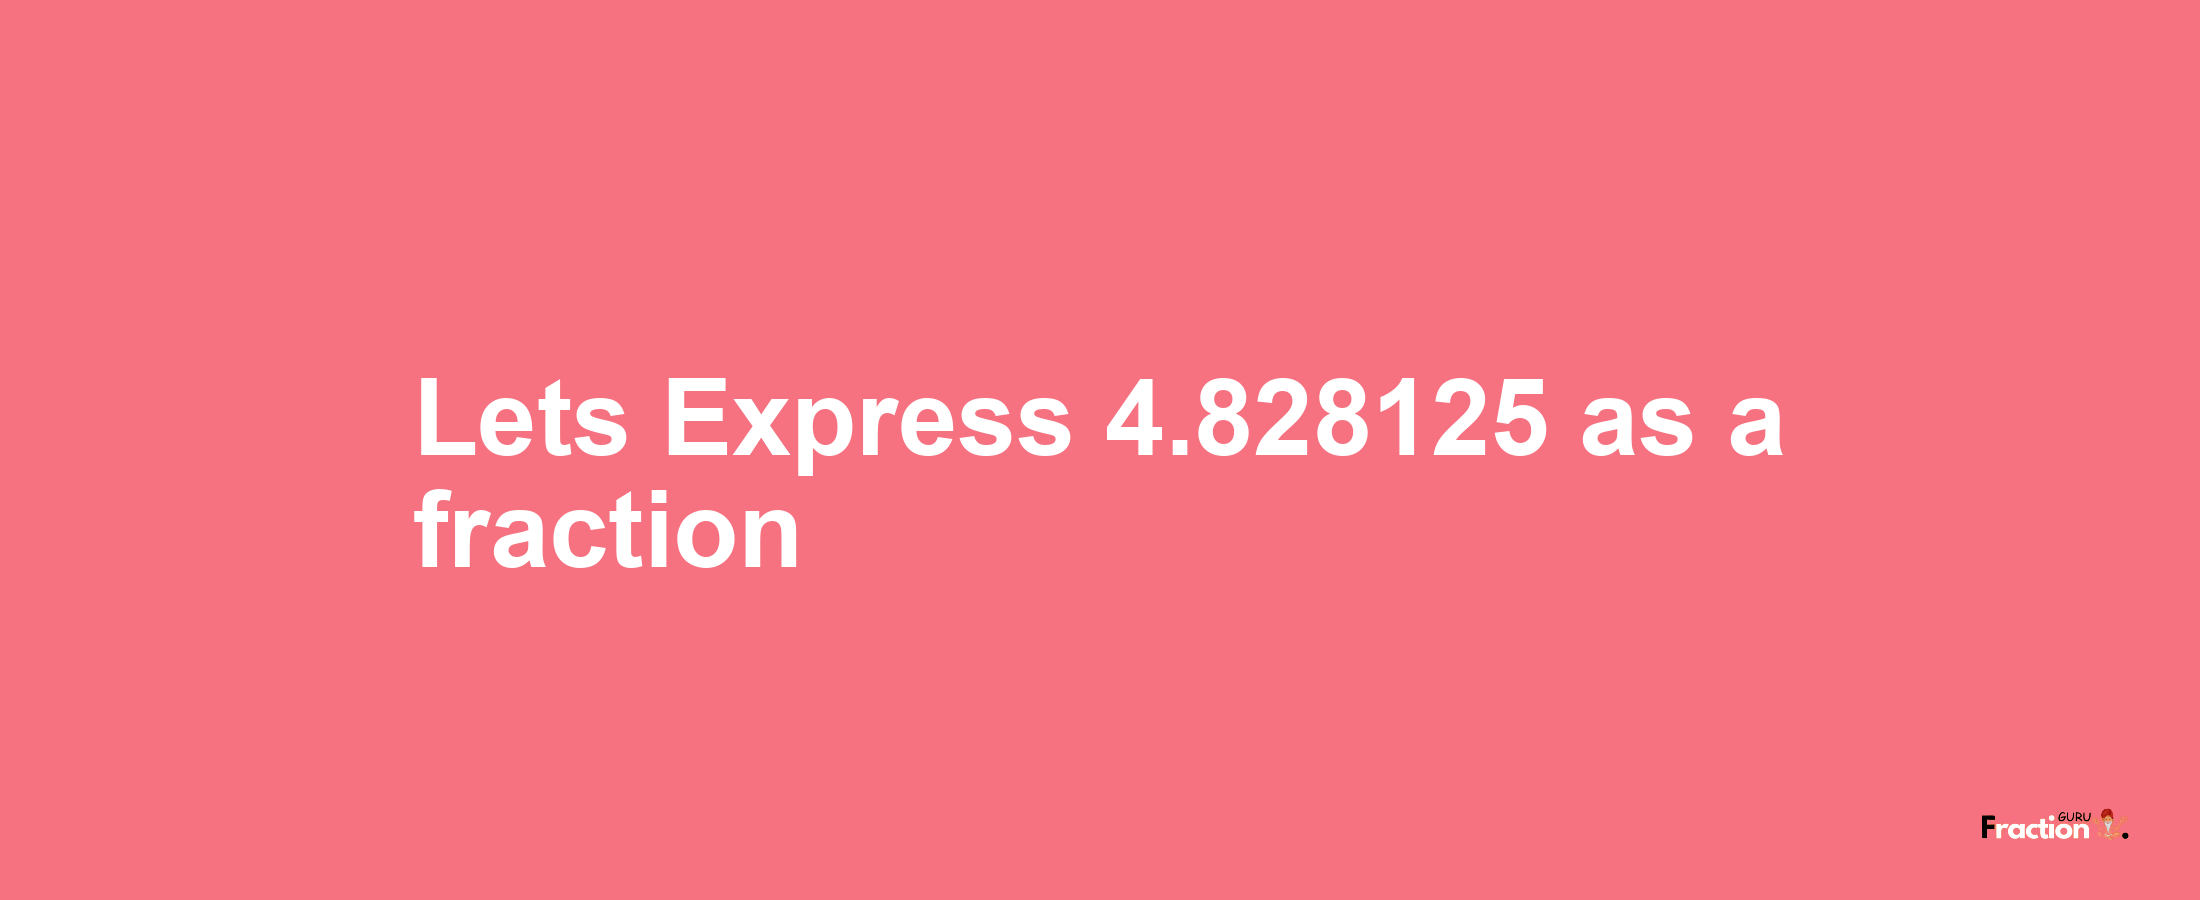 Lets Express 4.828125 as afraction